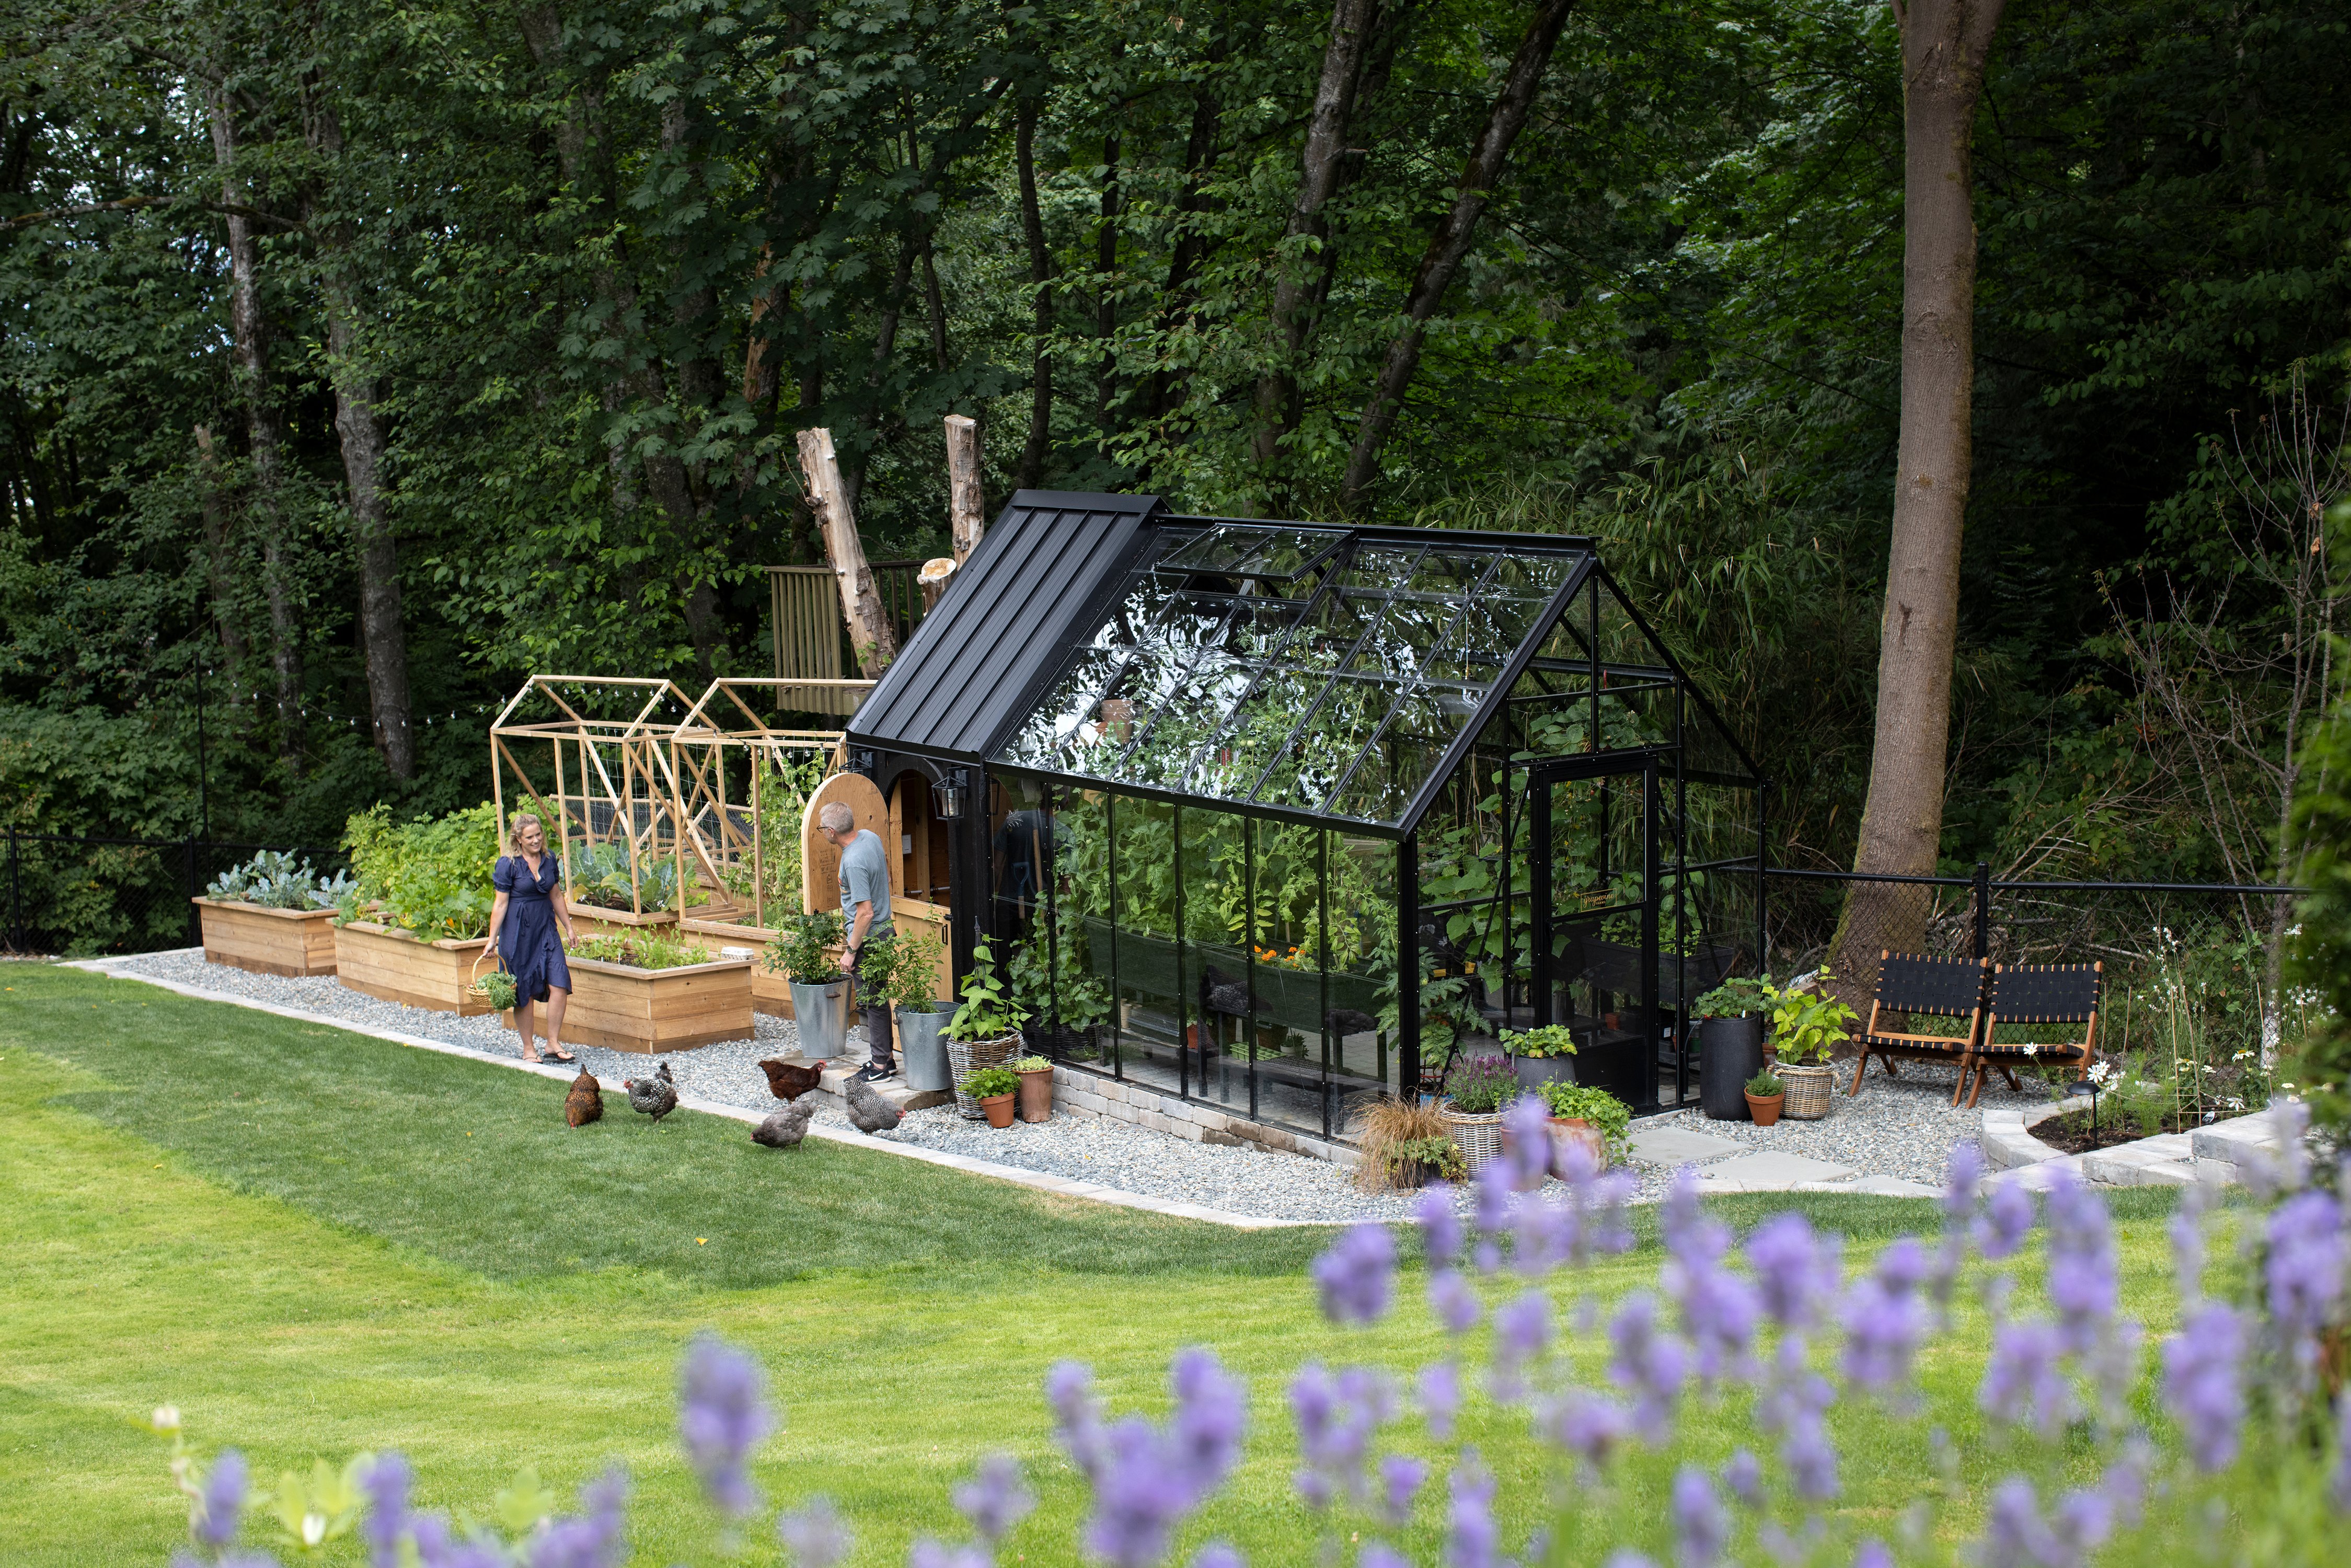 Black greenhouse and chicken coop with people and chickens in front of it